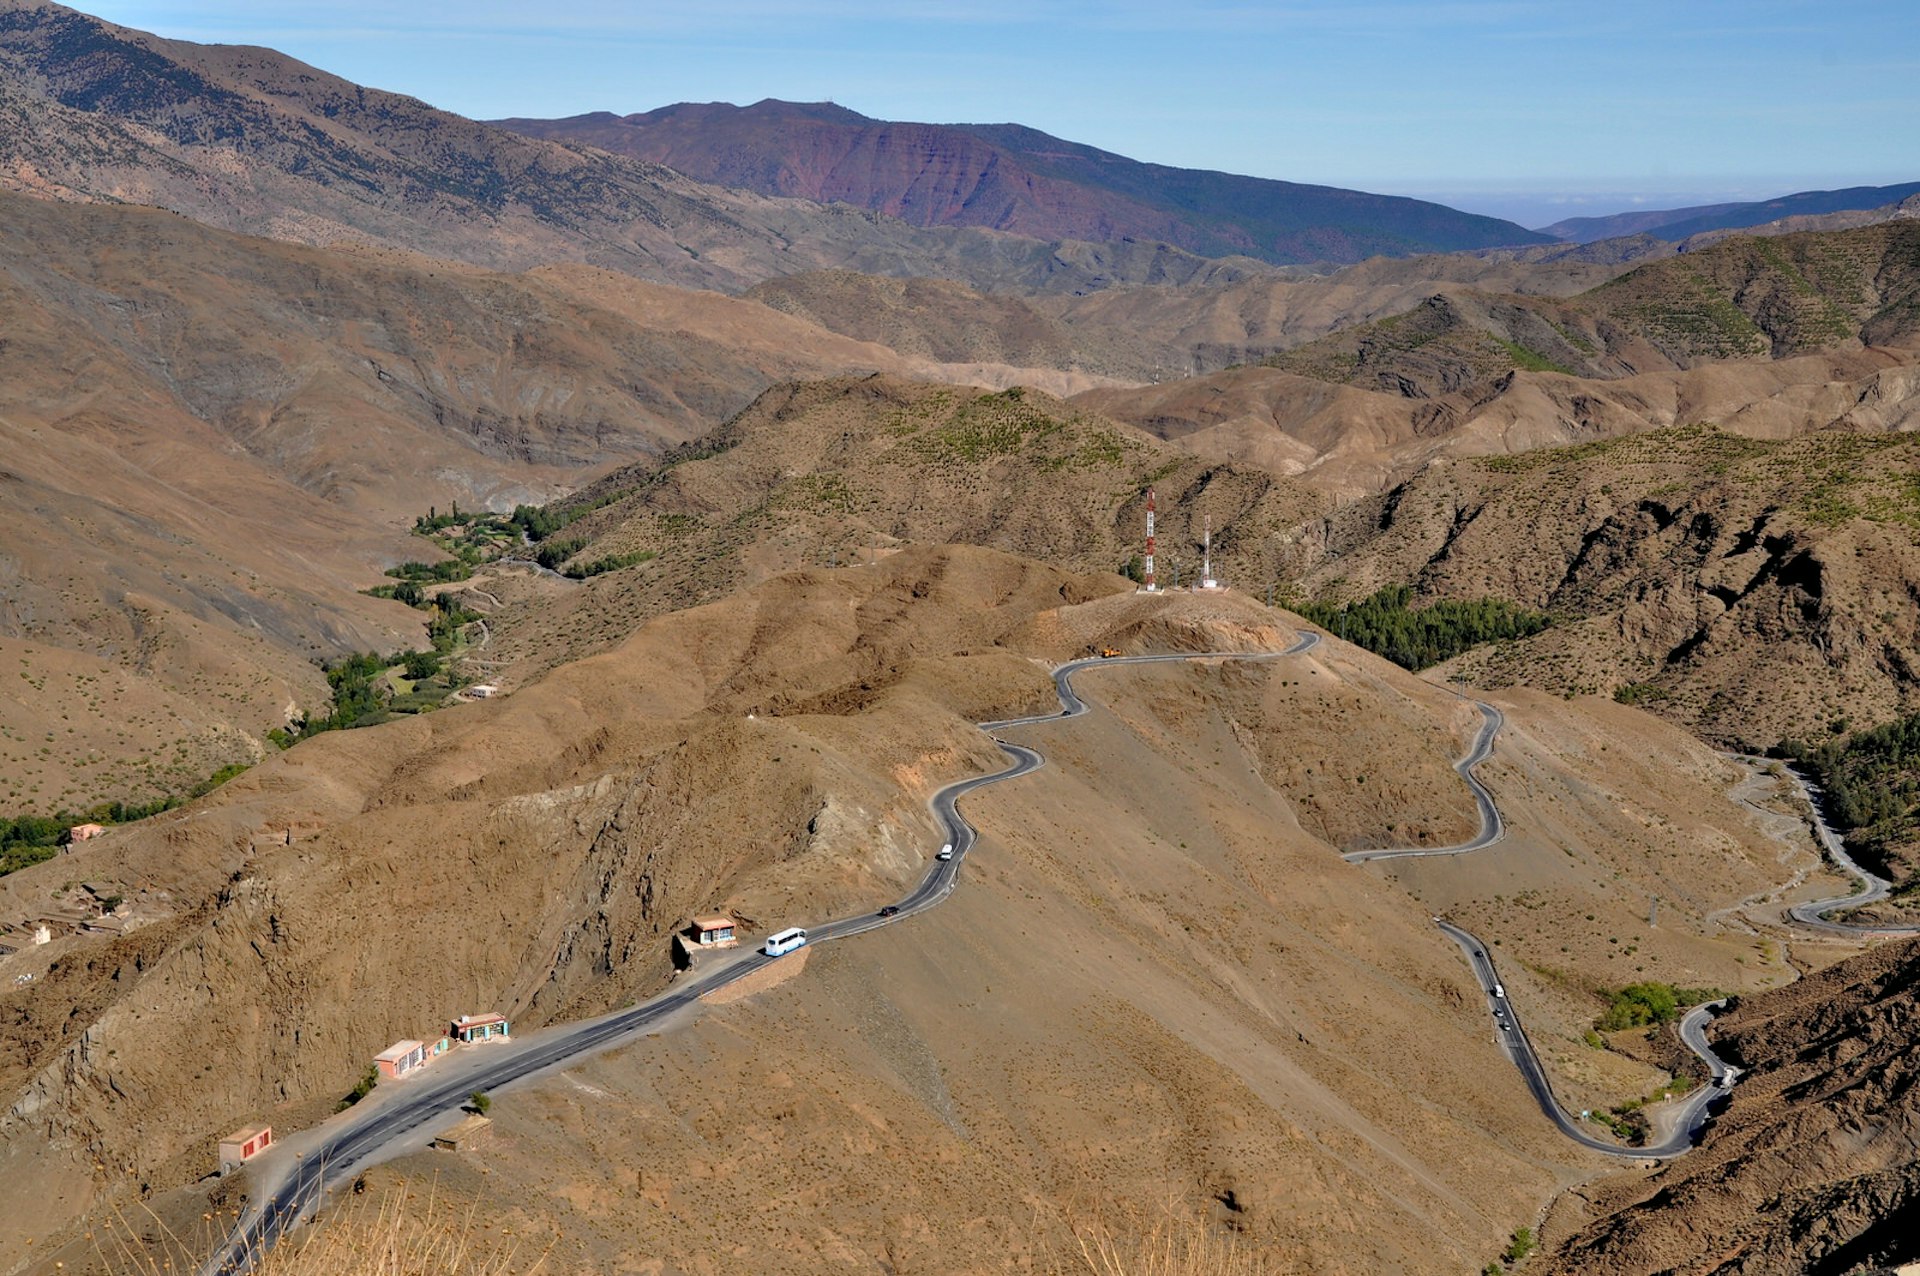 An aerial view of a winding road in the High Atlas mountains in Morocco